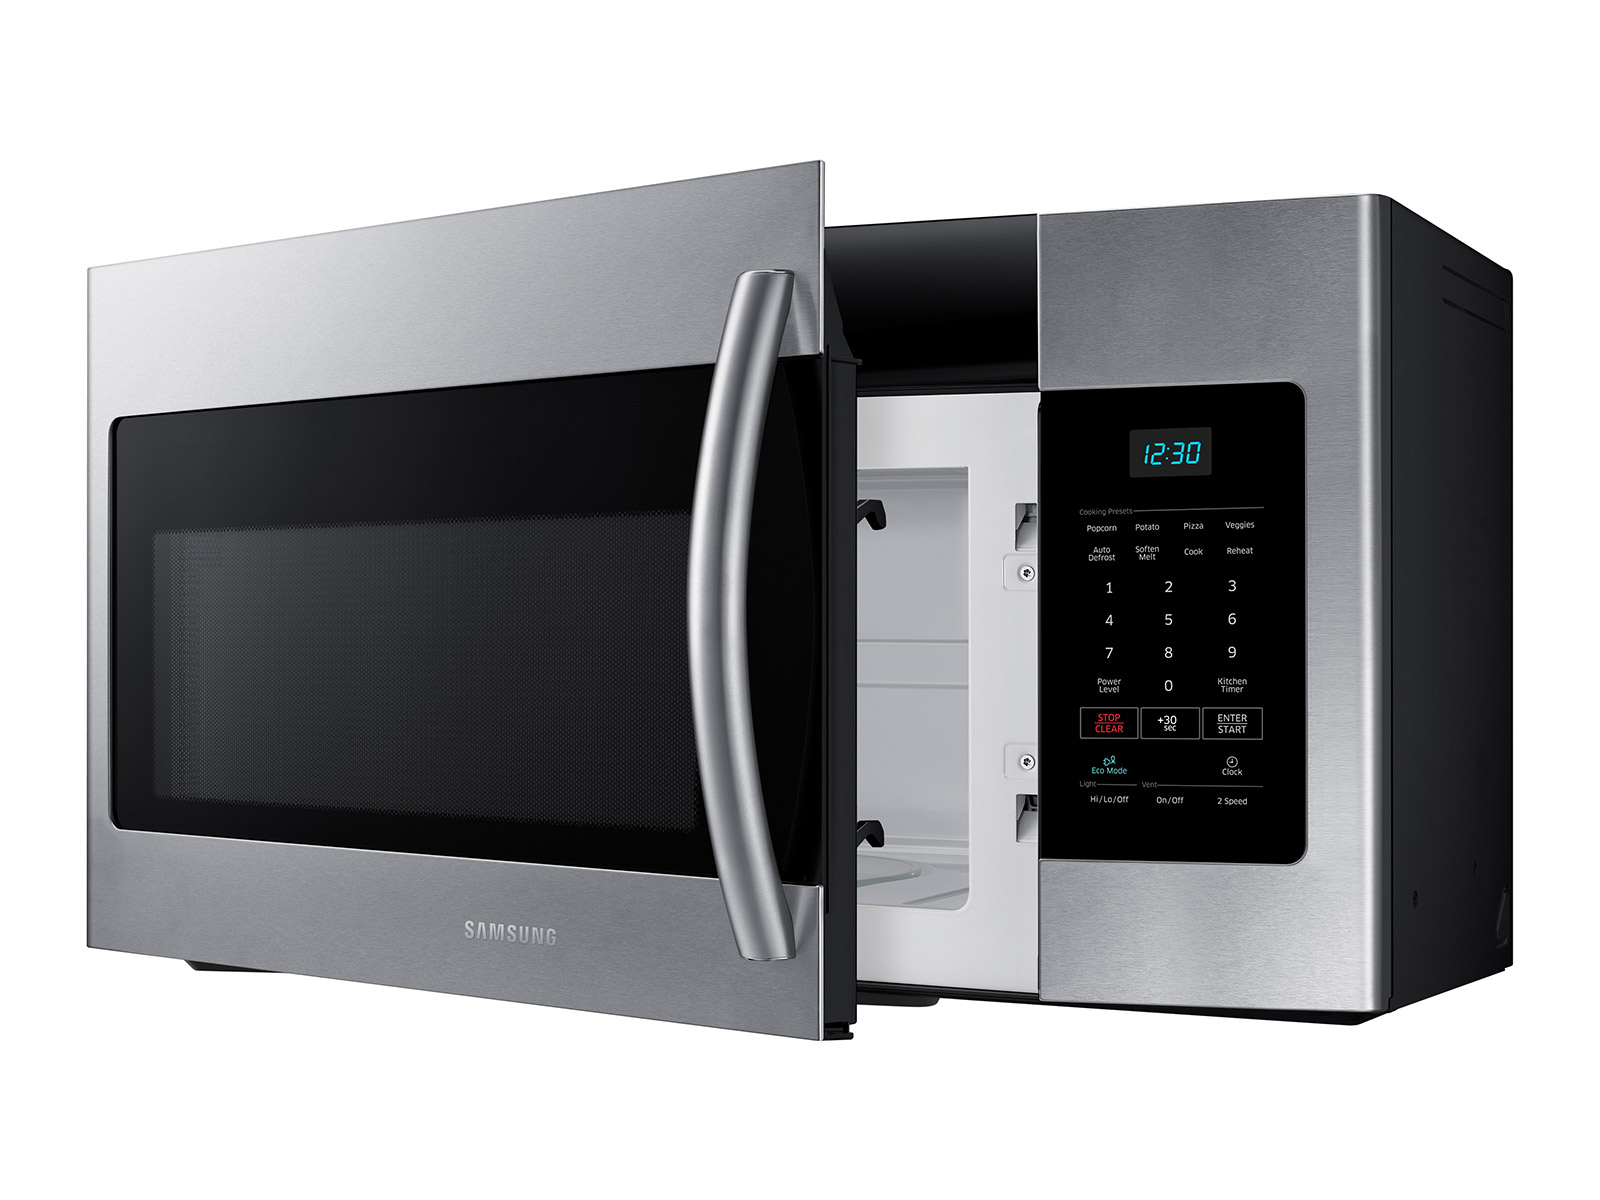 https://image-us.samsung.com/SamsungUS/home/home-appliances/microwaves/over-the-range/pdp/me16h702ses/10_Microwave_OTR_ME16H702SES_R-Perspective_Dynamic-Open_Silver.jpg?$product-details-jpg$